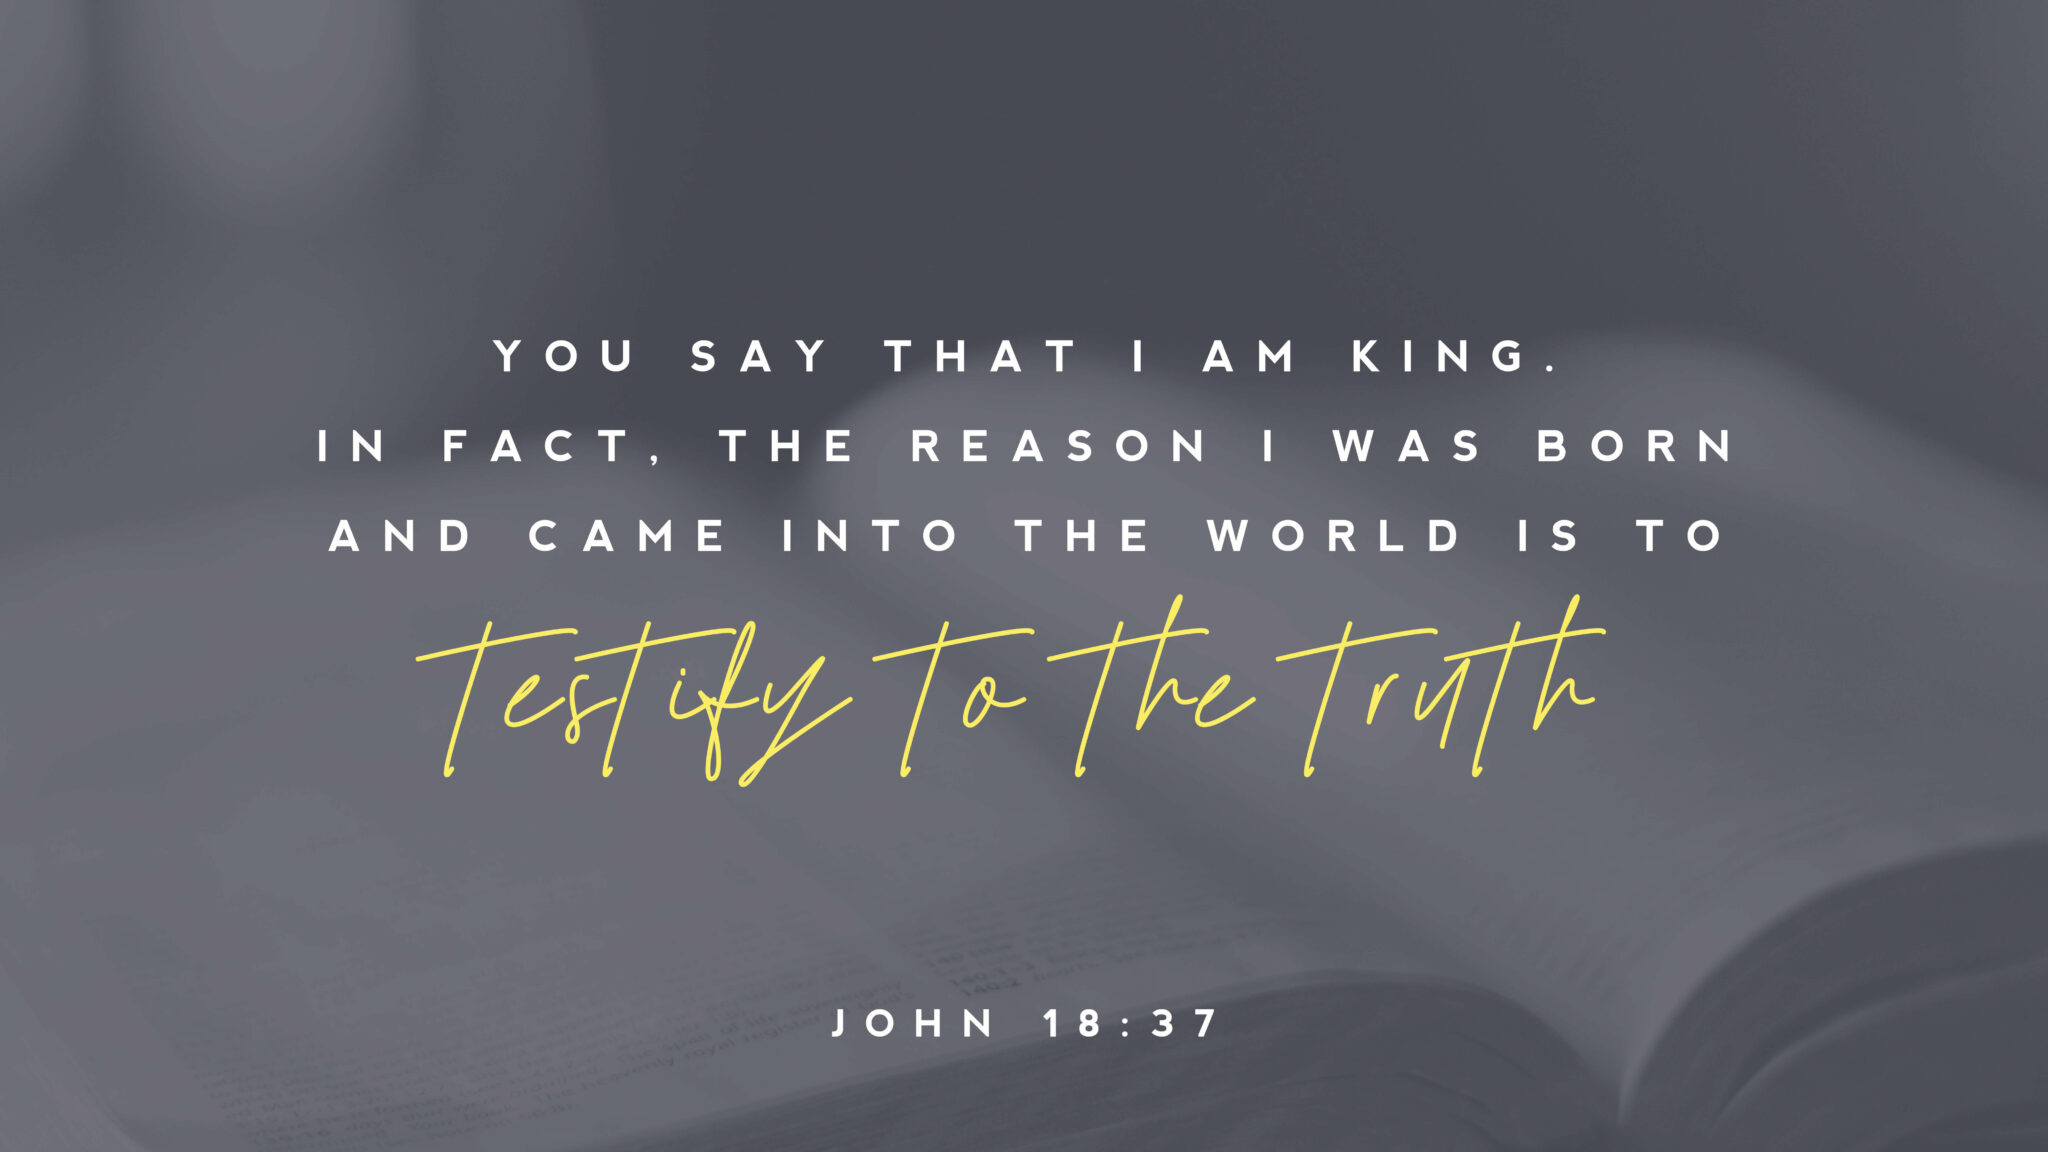 John 18:36 Jesus answered, My kingdom is not of this world; if it were, My  servants would fight to prevent My arrest by the Jews. But now My kingdom  is not of